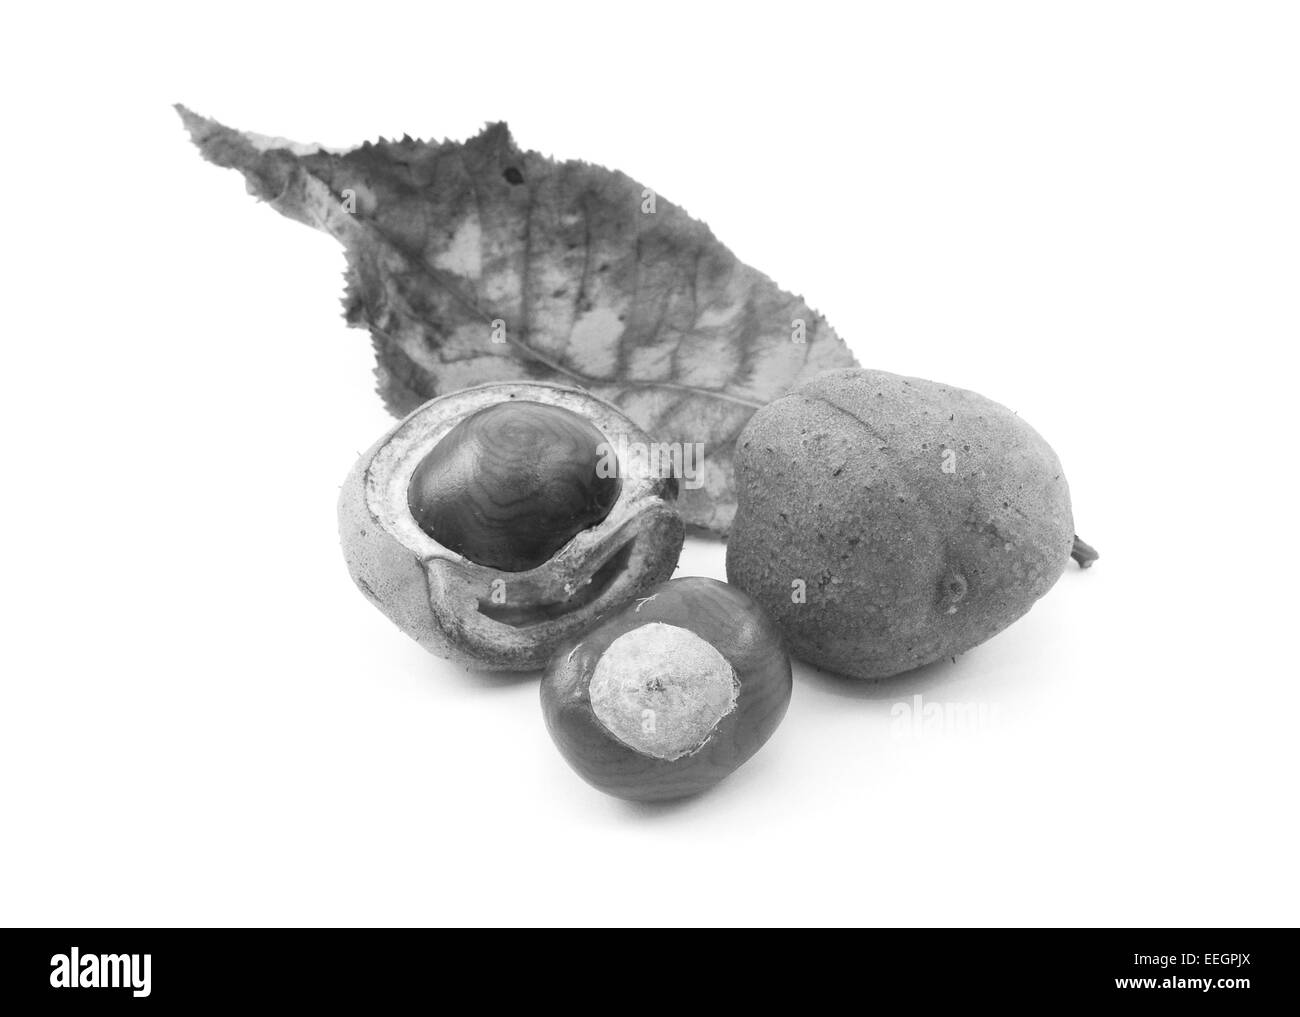 Conkers and smooth seed cases with the leaf of a red horse chestnut tree, isolated on a white background - monochrome processing Stock Photo